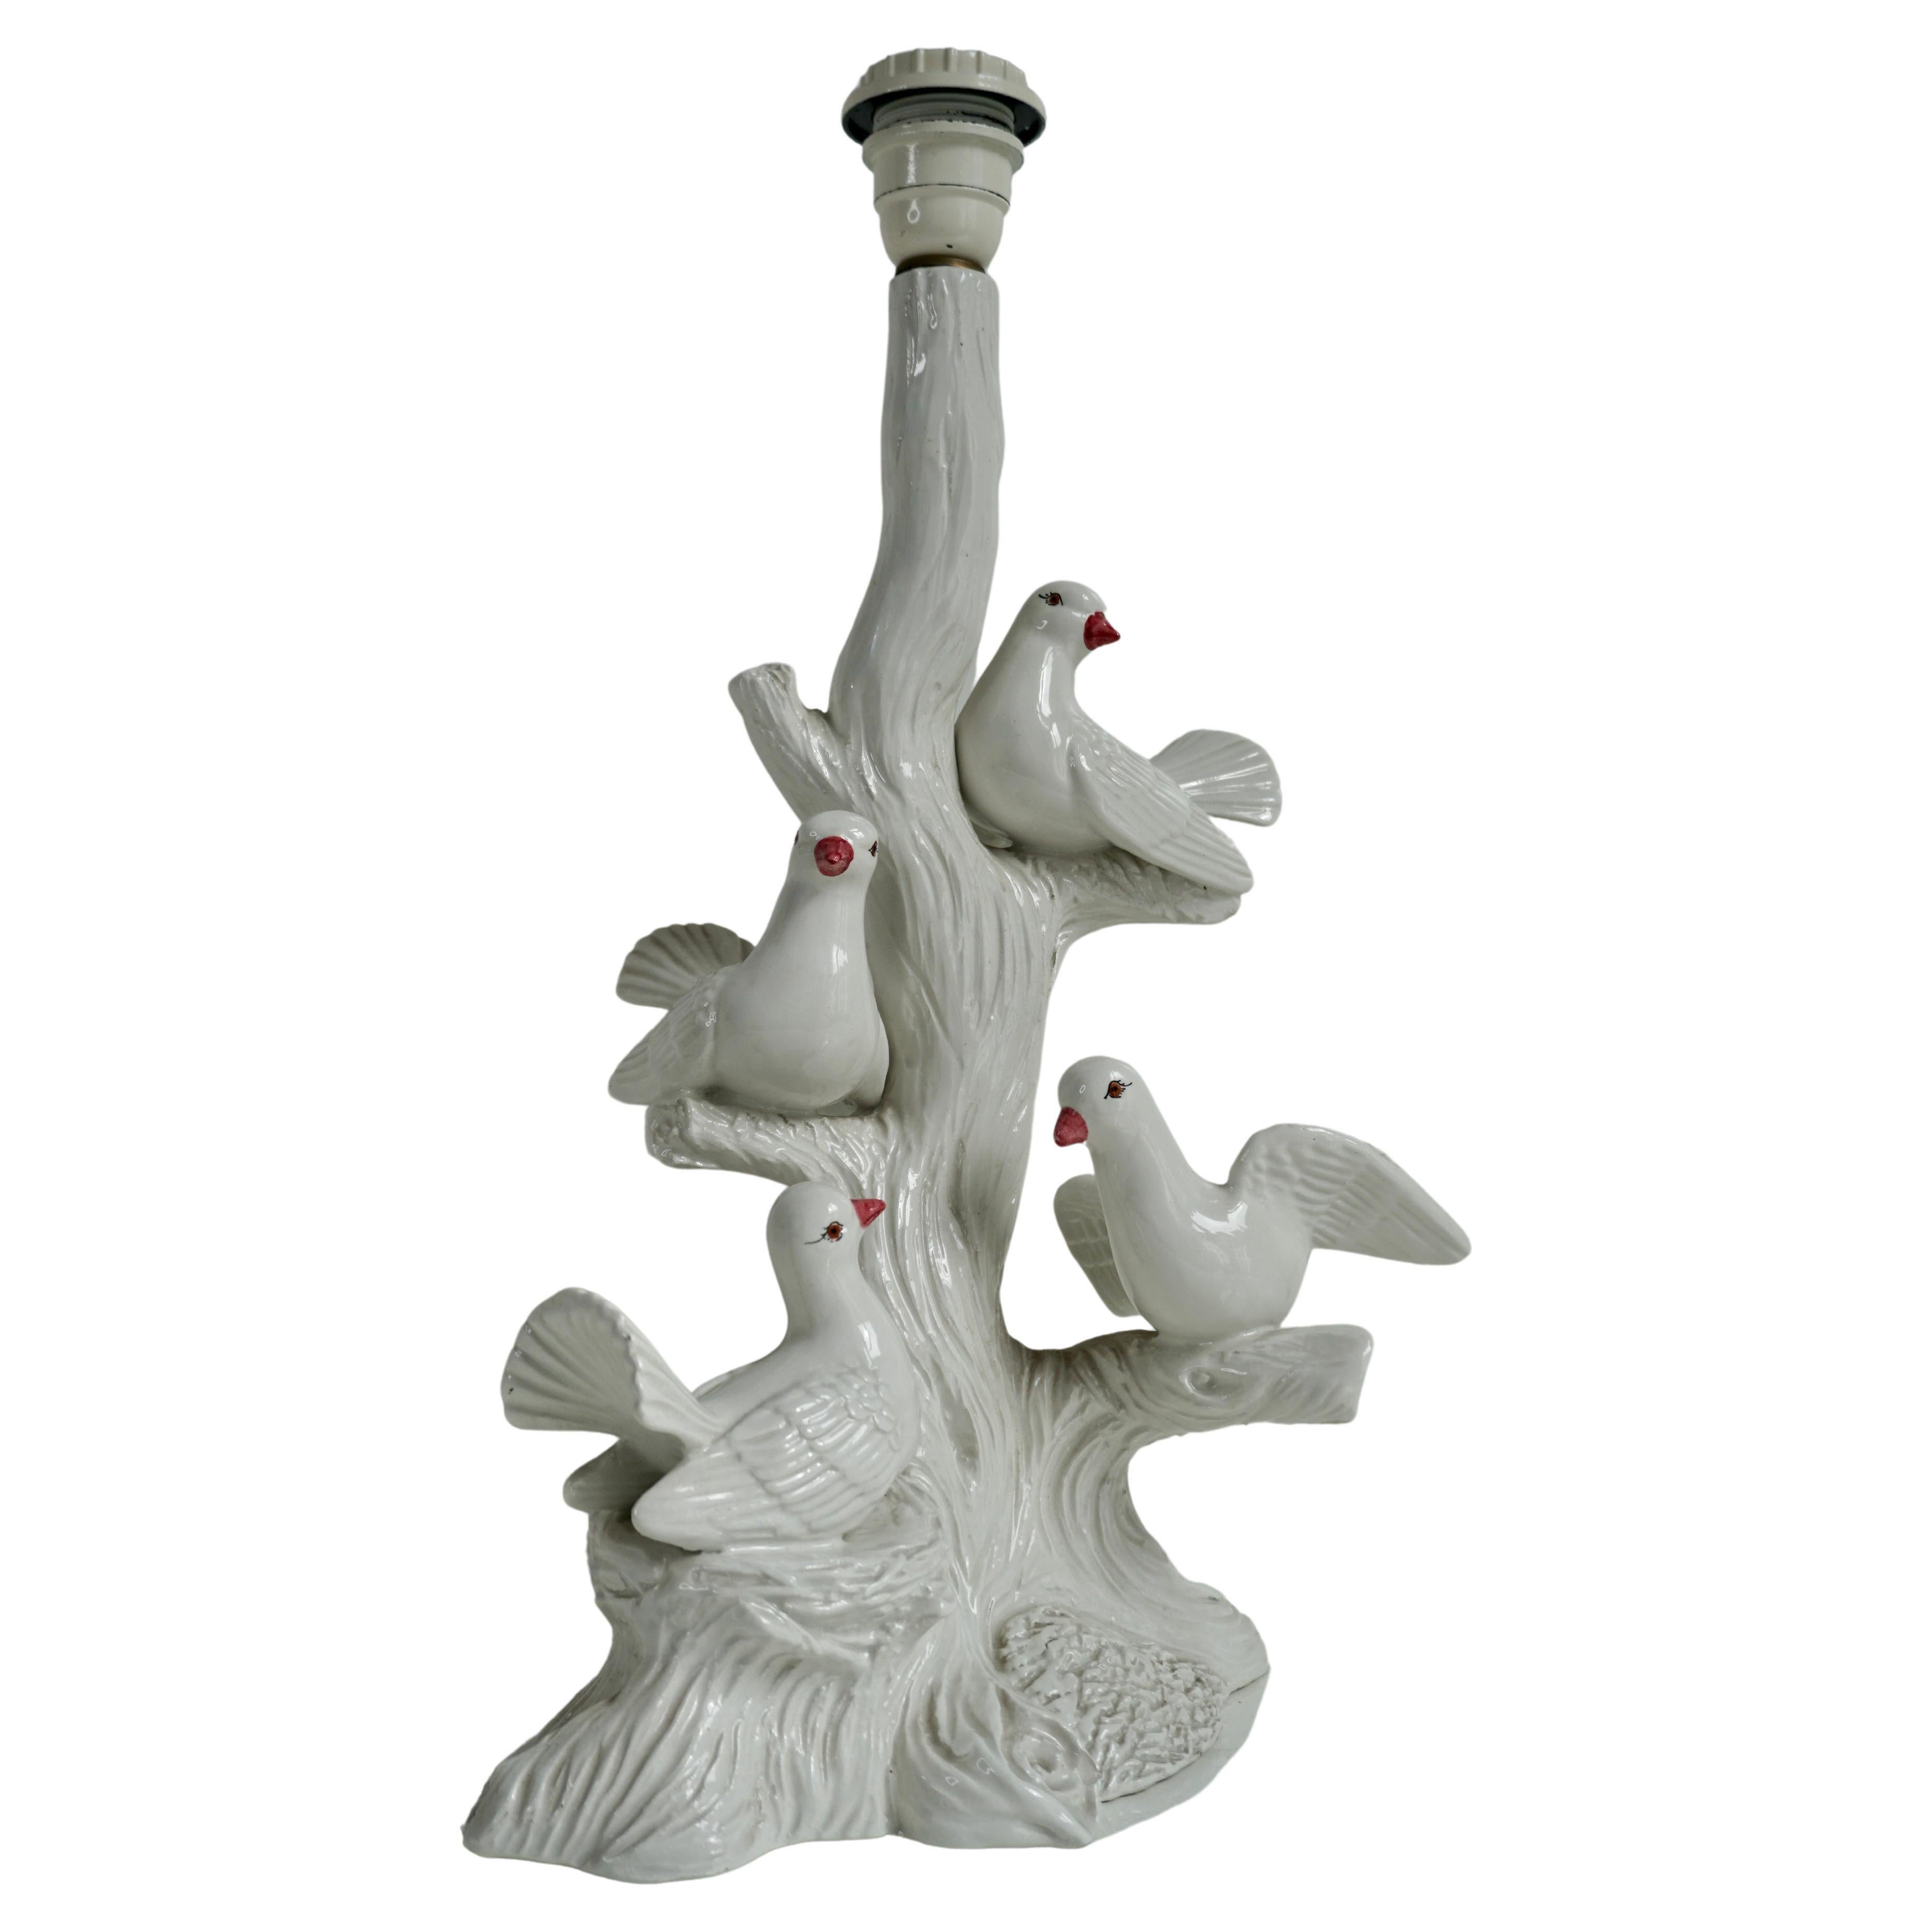 Ceramics bird lamp in Hollywood Regency style.
Beautiful white glazed ceramic base with 4 doves on a branch.
Very nice proportions, details and finish.
In excellent intact condition, no damage or cracks etc.

Dimensions:
Height with lampshade: 58